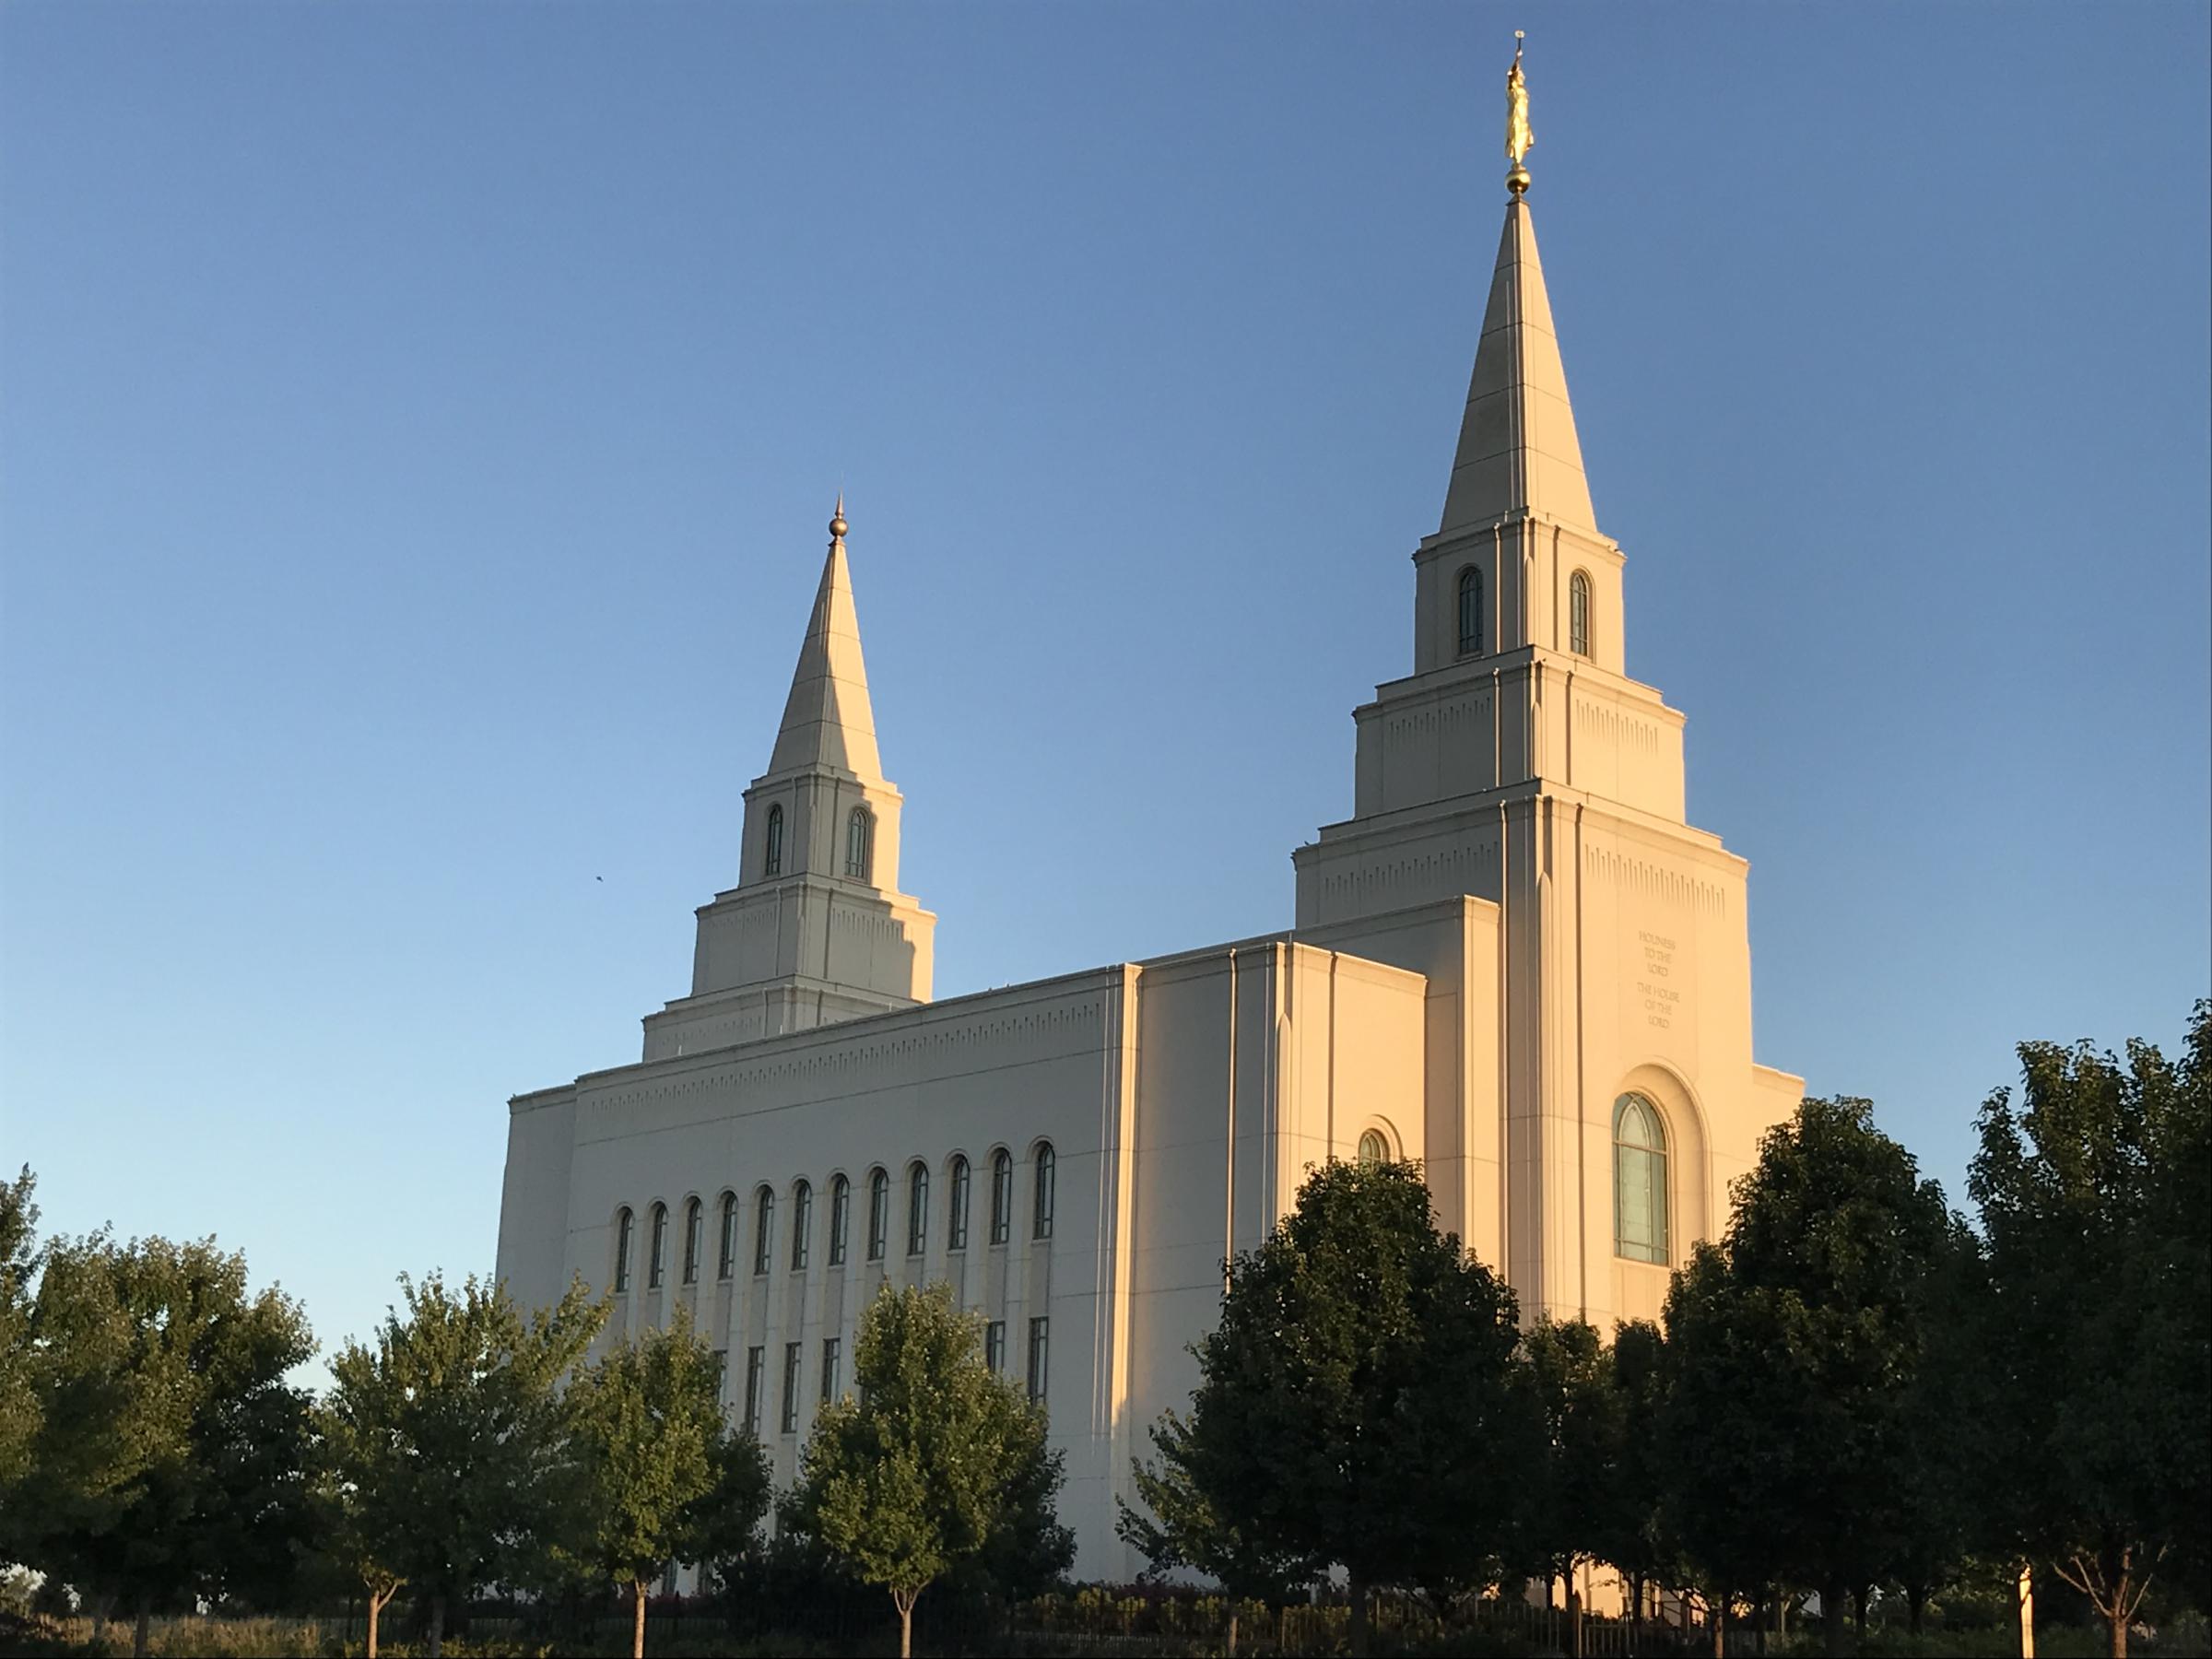 As Latter-day Saints Community Grows In Liberty, Church Leaders Balance ...